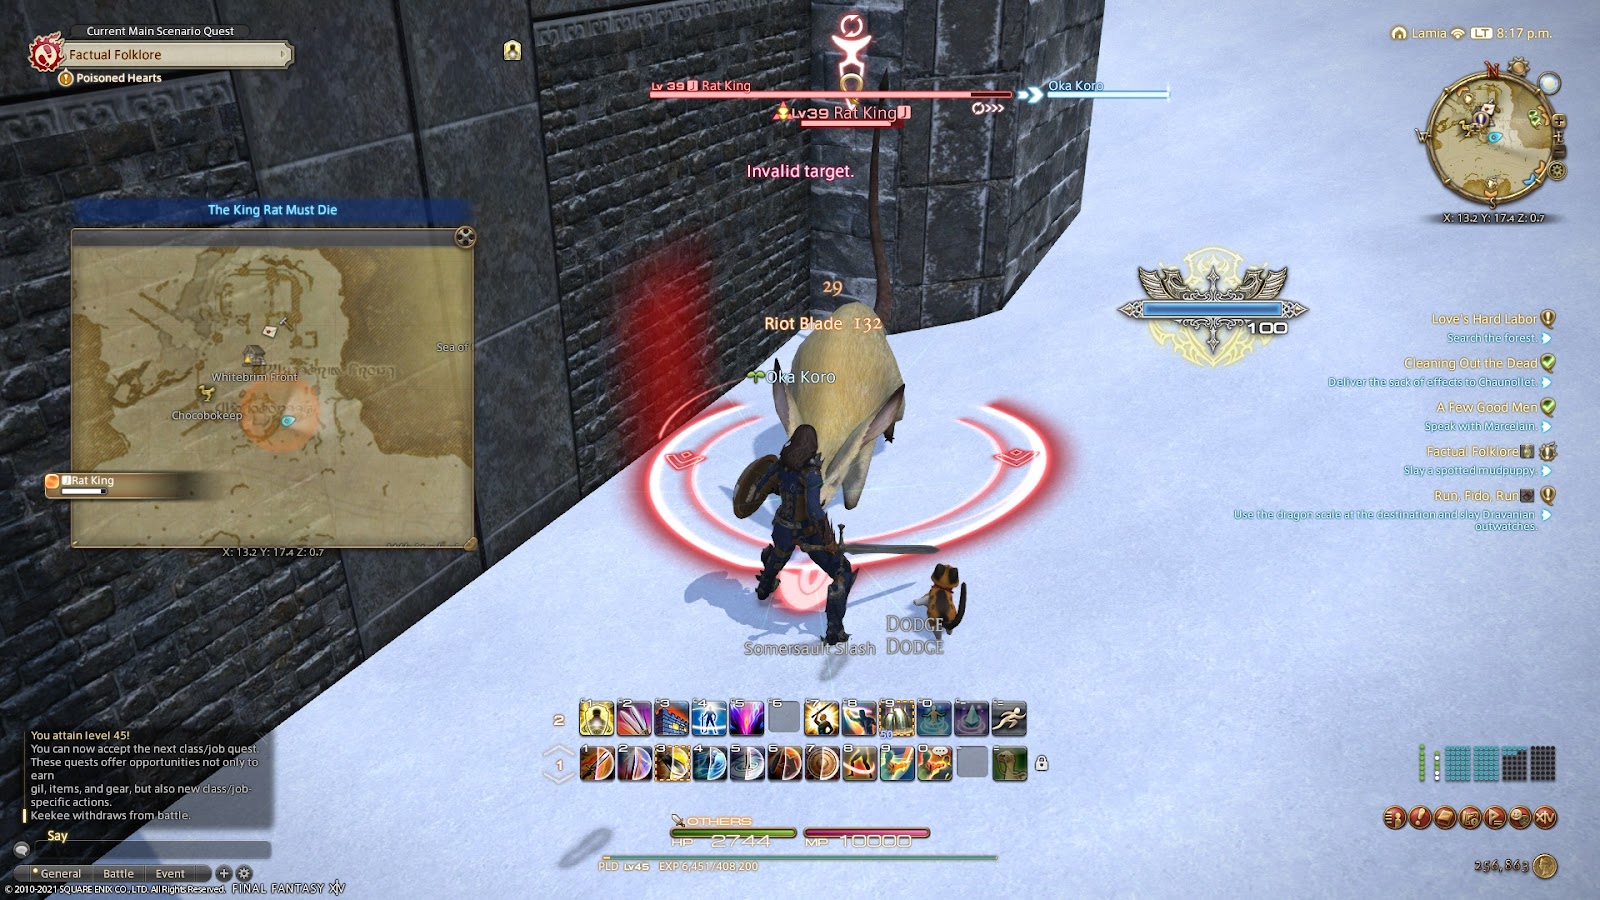 A Final Fantasy XIV character fighting a giant animal with a sword in the snow near some stone walls.